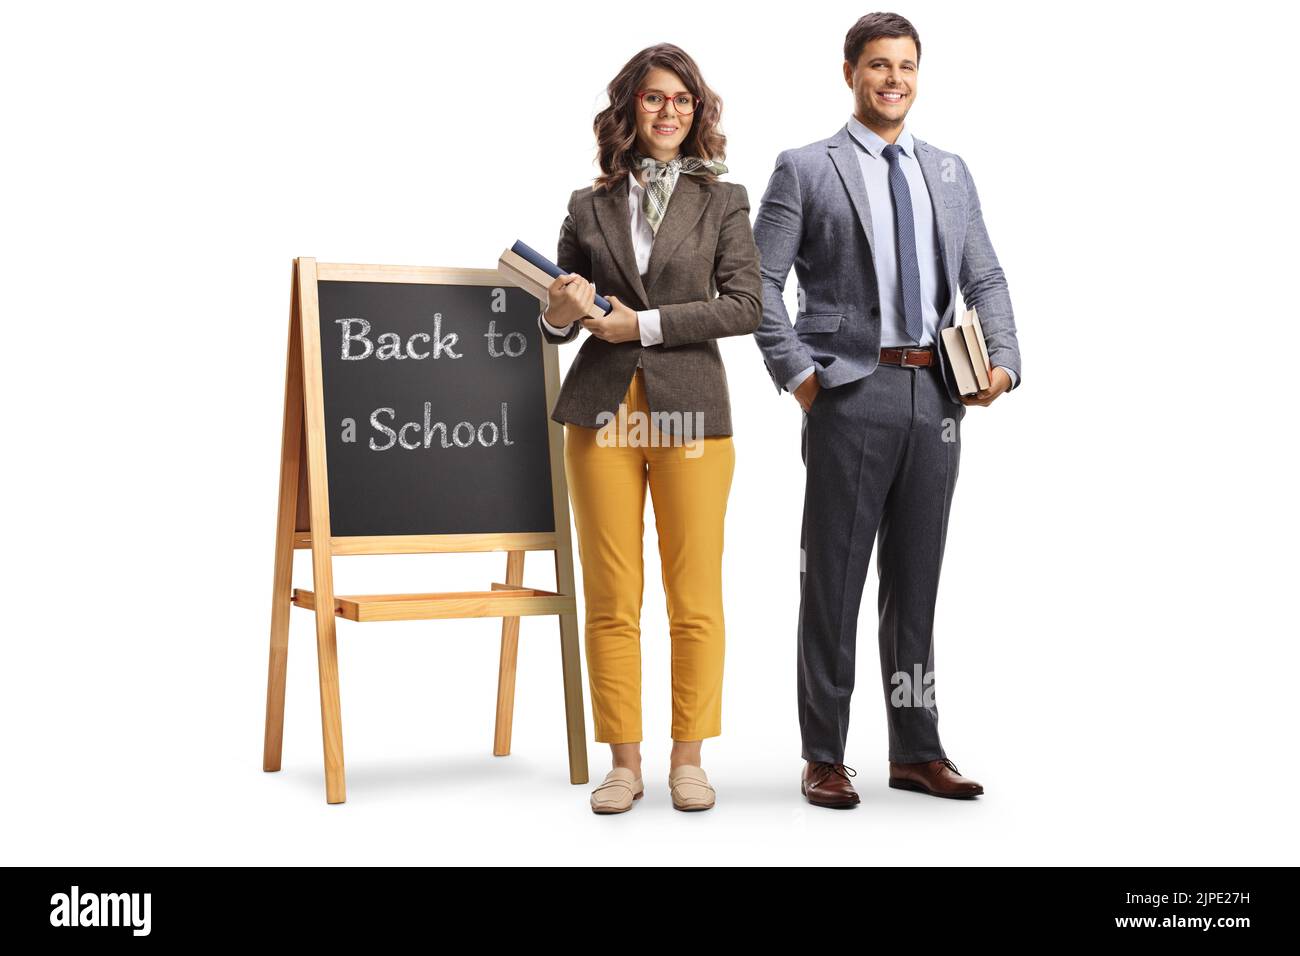 Full length portrait of a male and female teacher standing next to a blackboard with text back to school isolated on white background Stock Photo